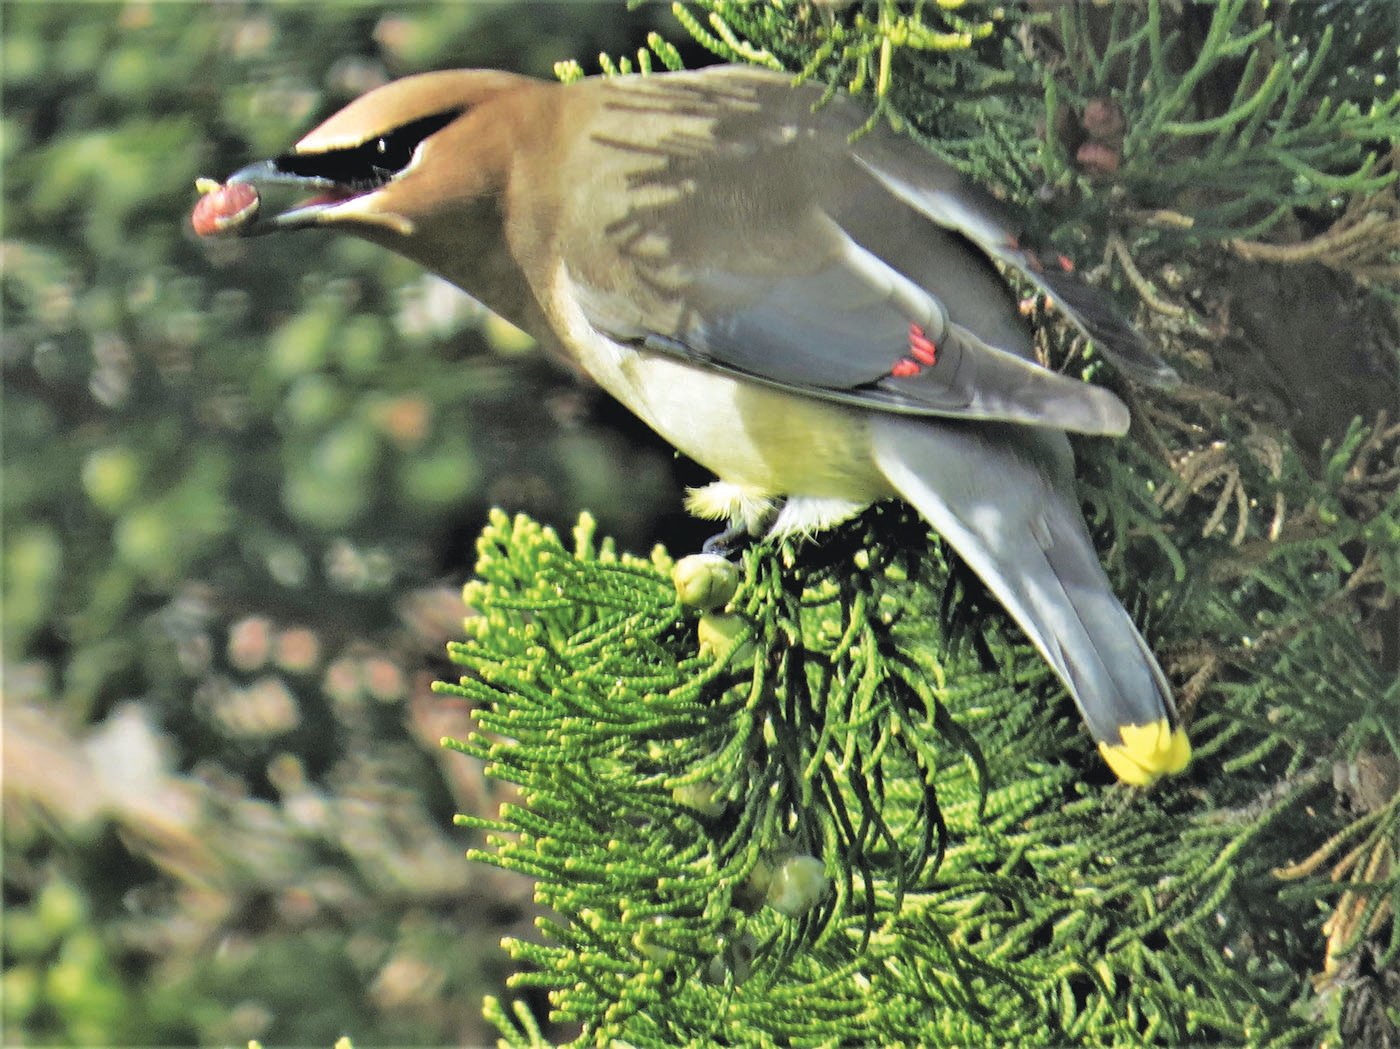 Adult Cedar Waxwings like this one have been more numerous on the island this week.